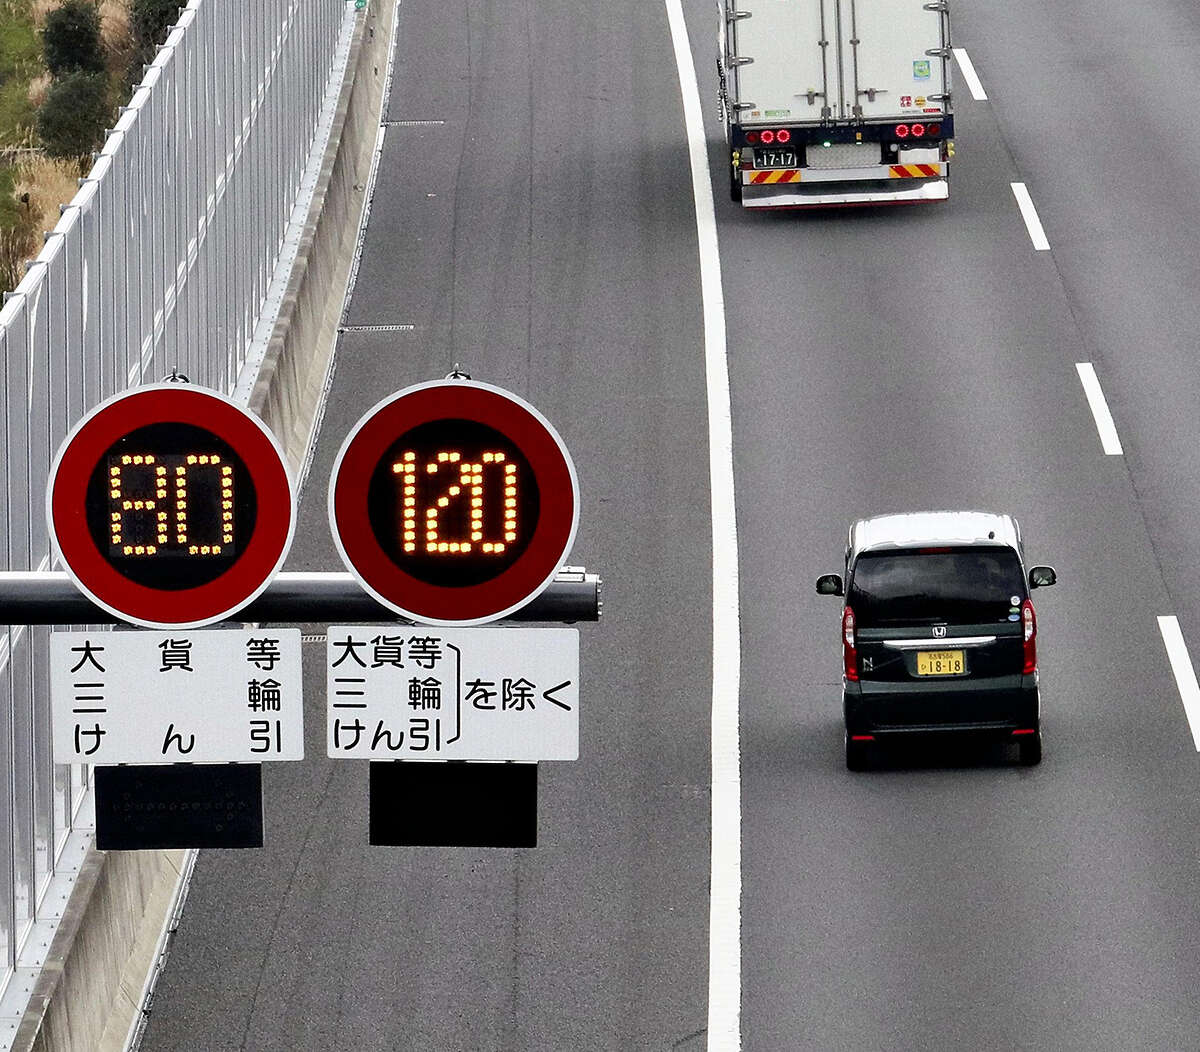 An expressway sign indicates a speed limit of 120 kph on the Shin-Tomei Expressway in Shizuoka Prefecture, Japan on Friday.